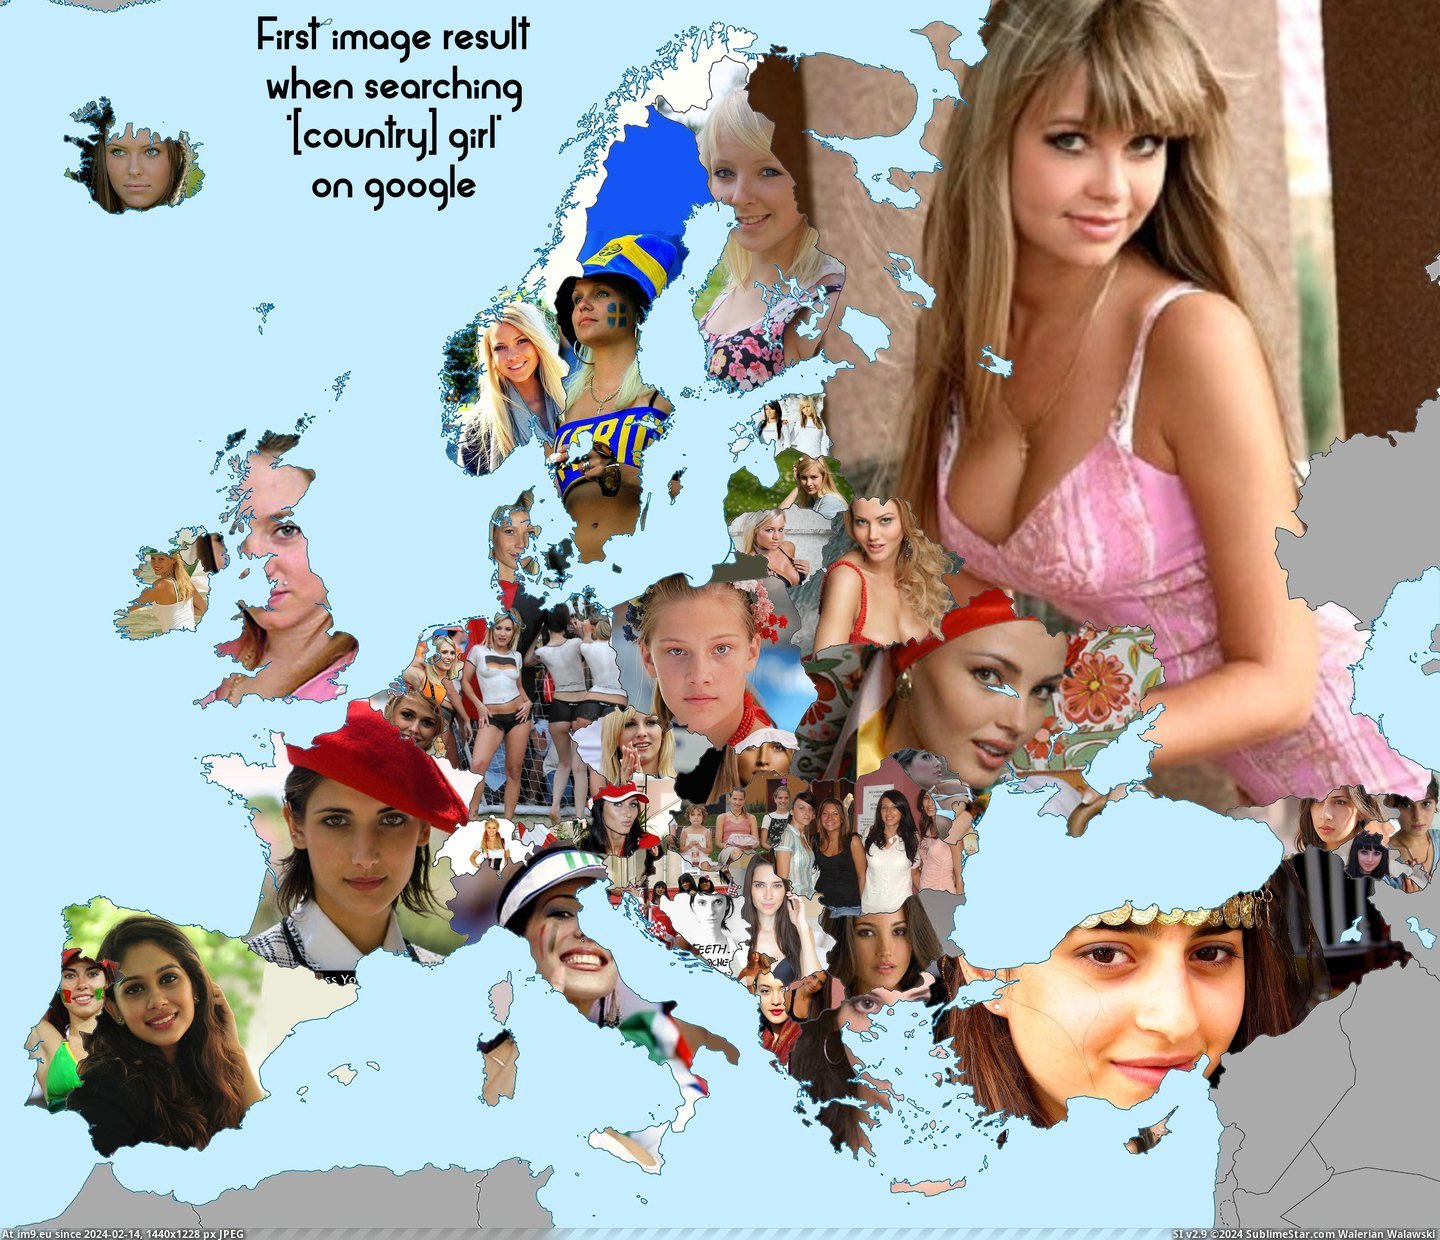 #Image #Girl #Country #Result #Searching #Map #Europe [Mapporn] Europe map with the first image result when searching '[country] girl]' [OC] [5000x4275] Pic. (Изображение из альбом My r/MAPS favs))